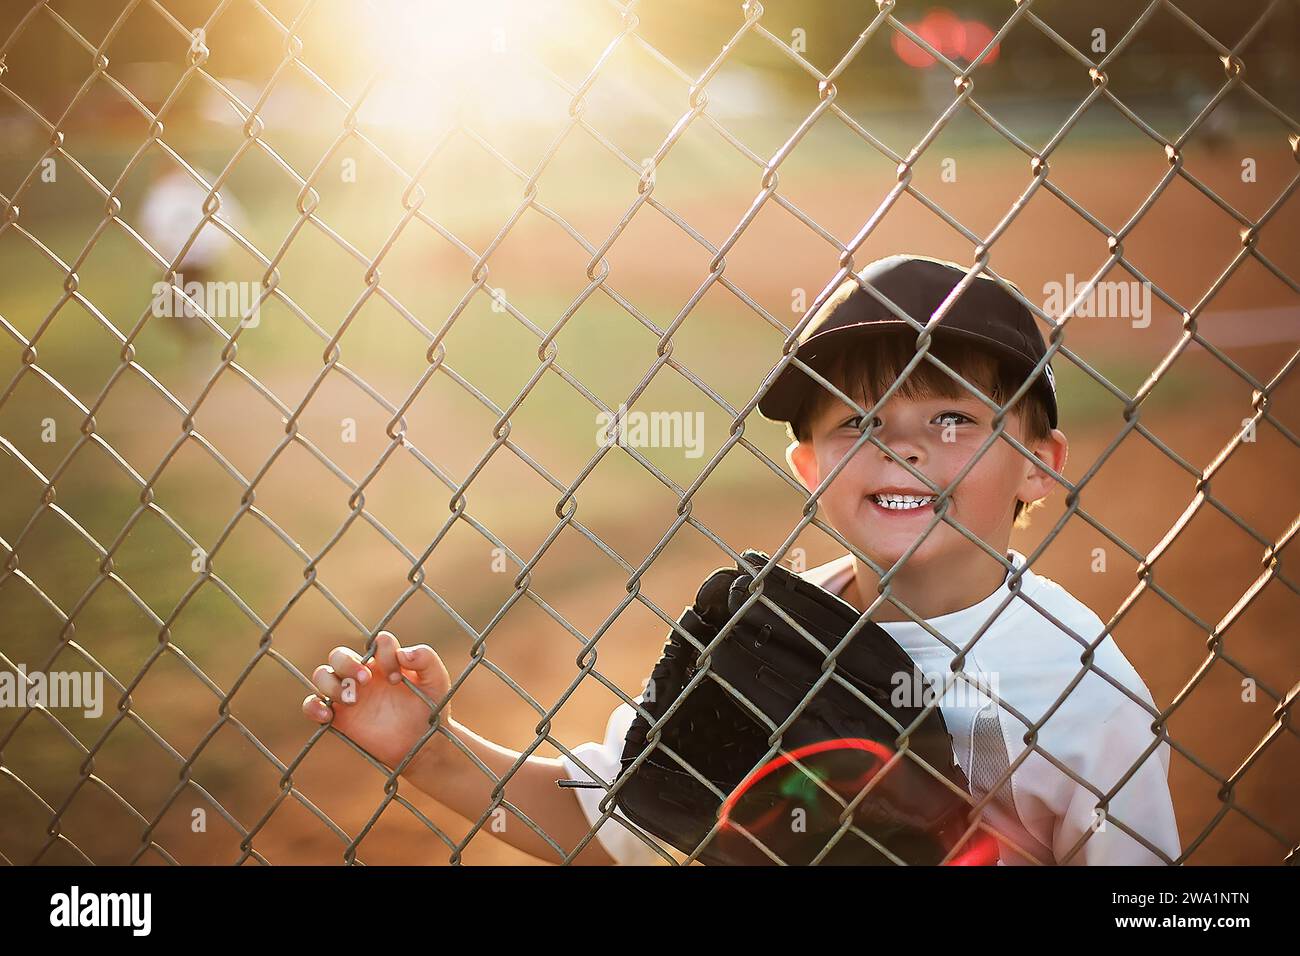 Little boy at a baseball game looking through the fence smiling Stock Photo